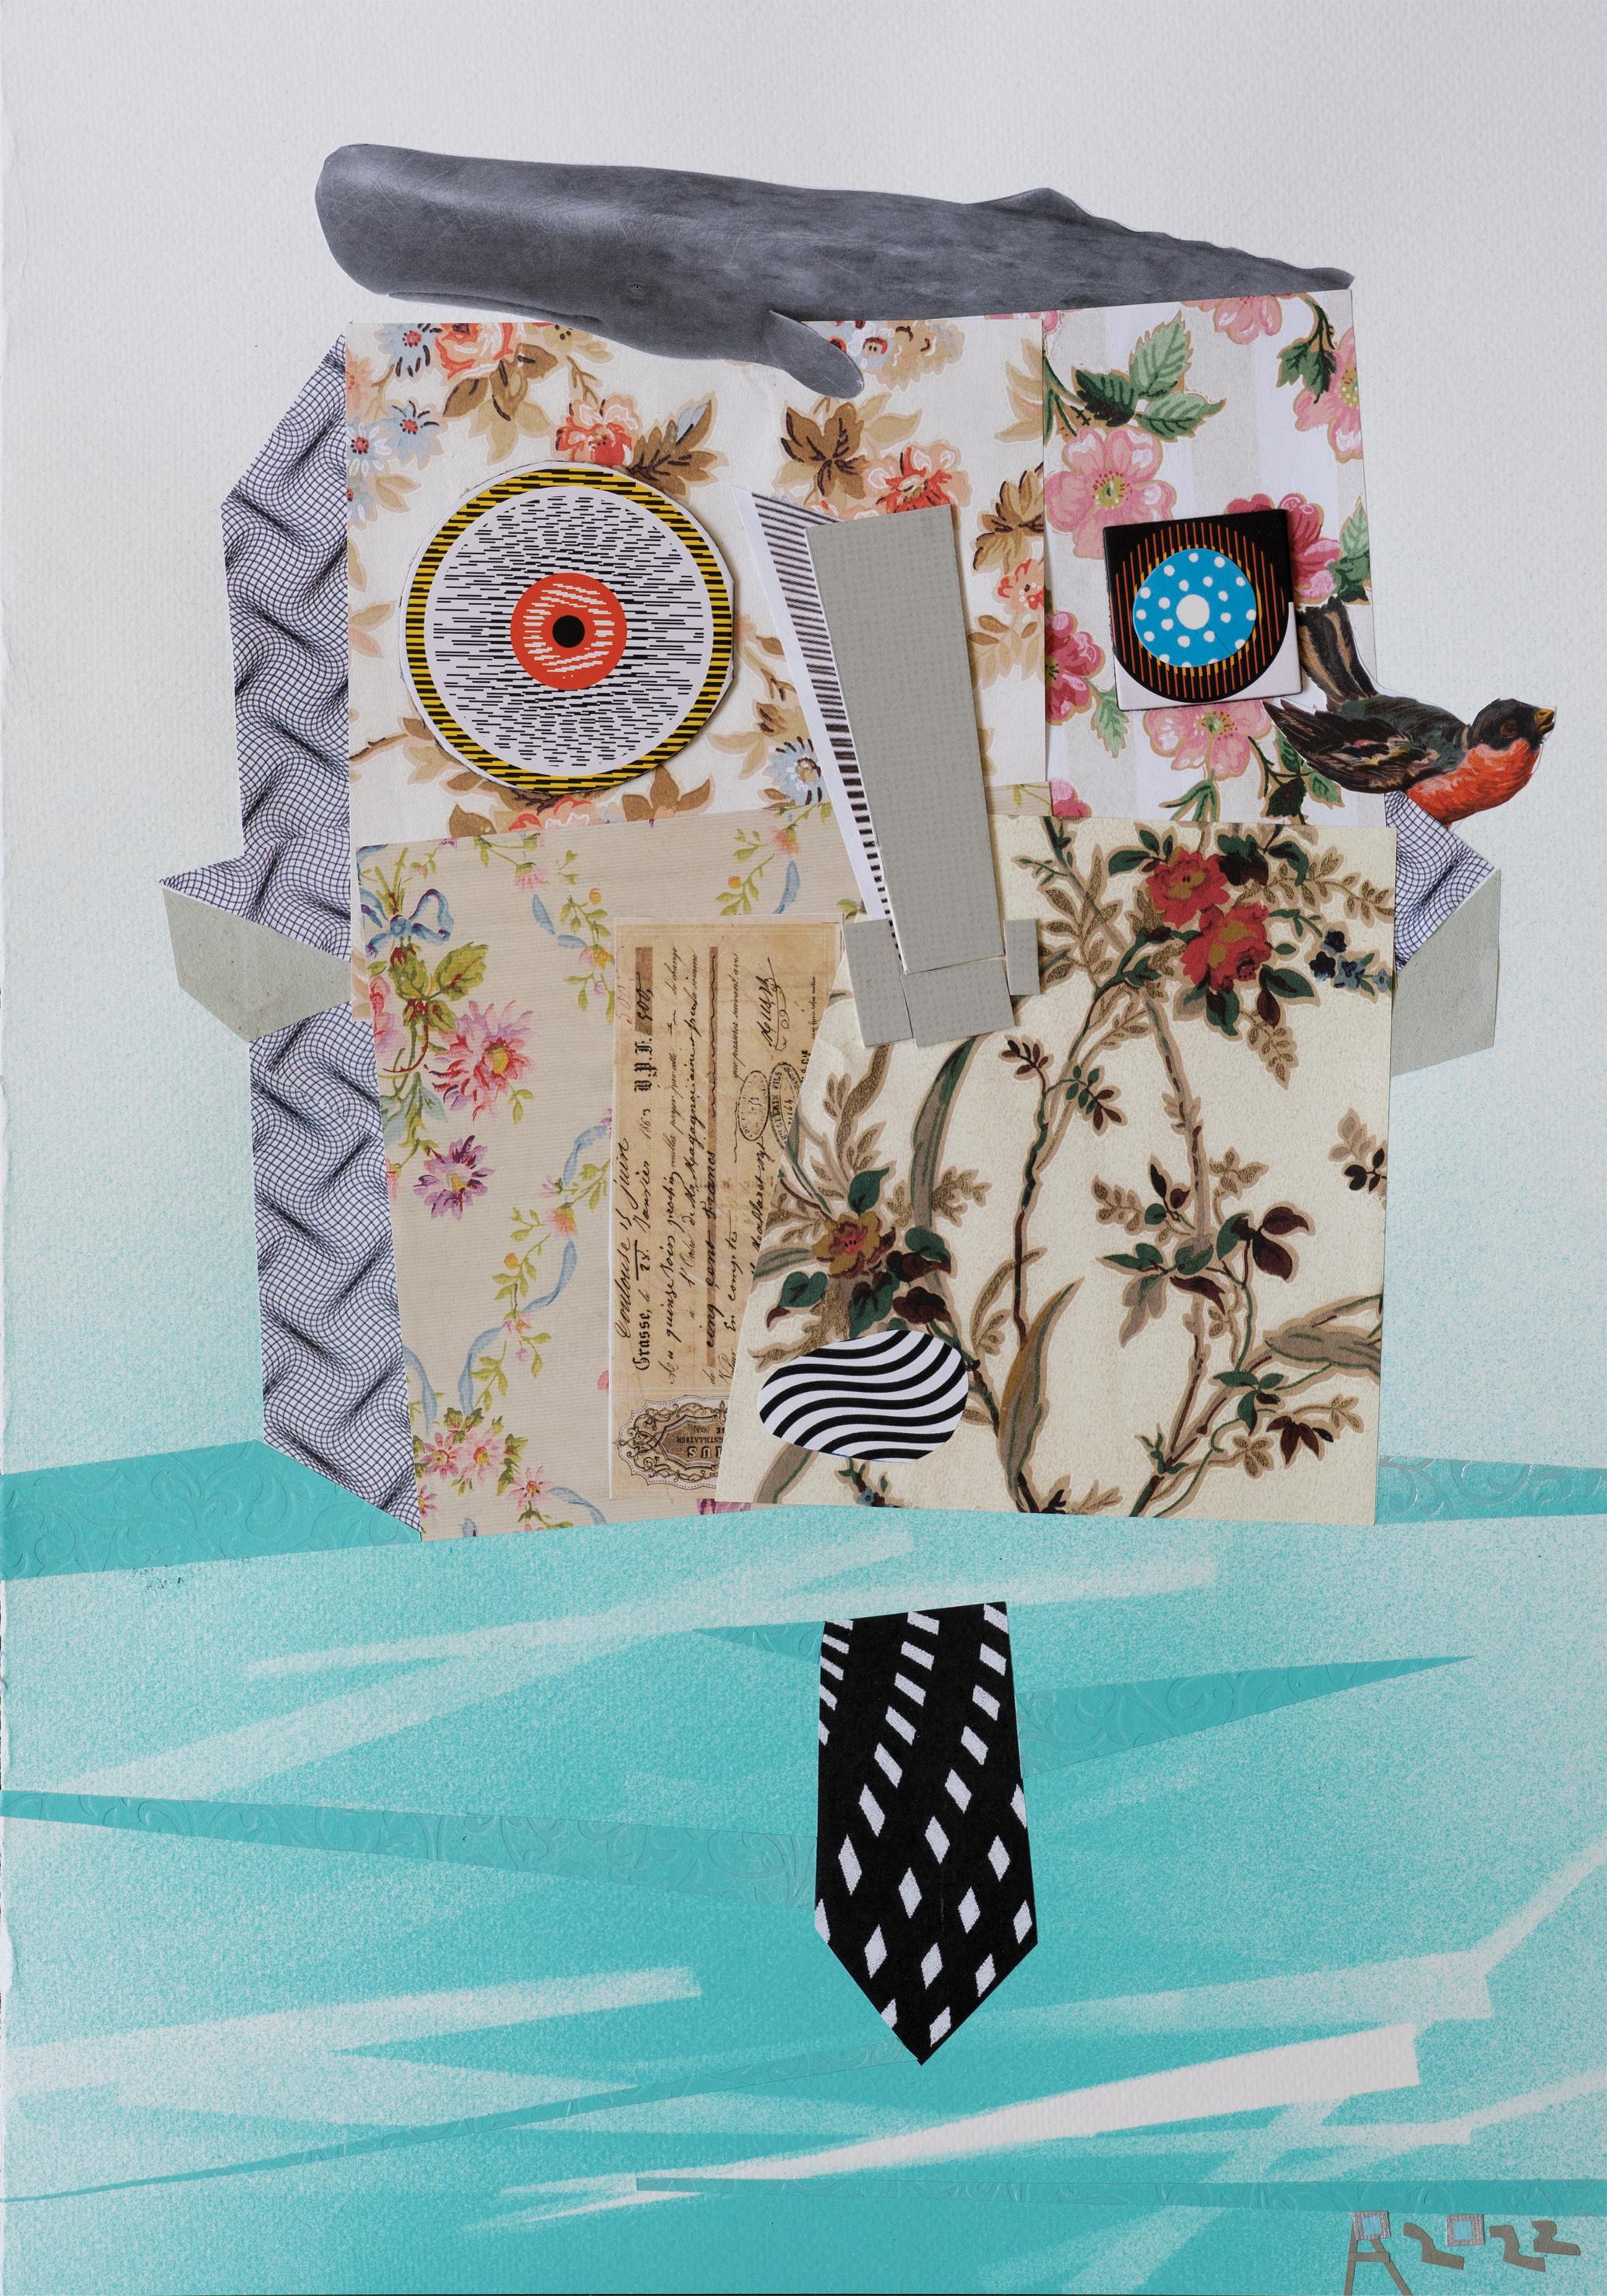 The Scientist - Contemporary Art, Collage, Paper, 21st Century